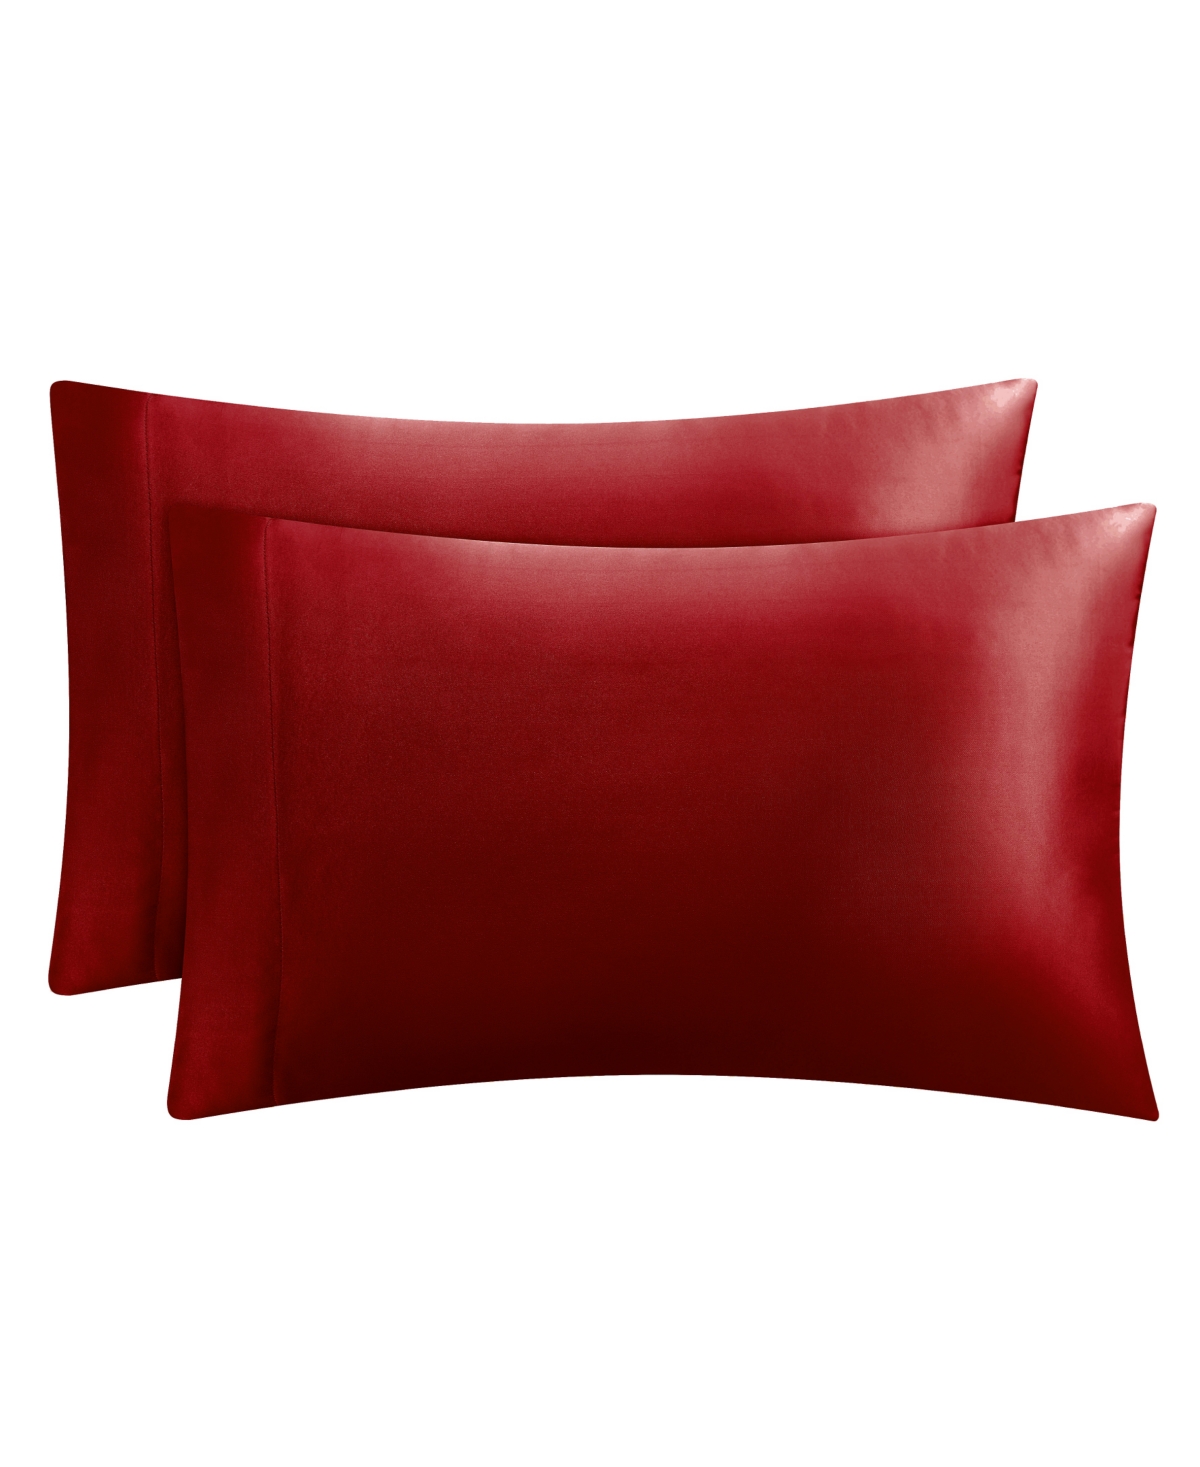 Juicy Couture Satin 2 Piece Pillow Case Set, Standard In Red